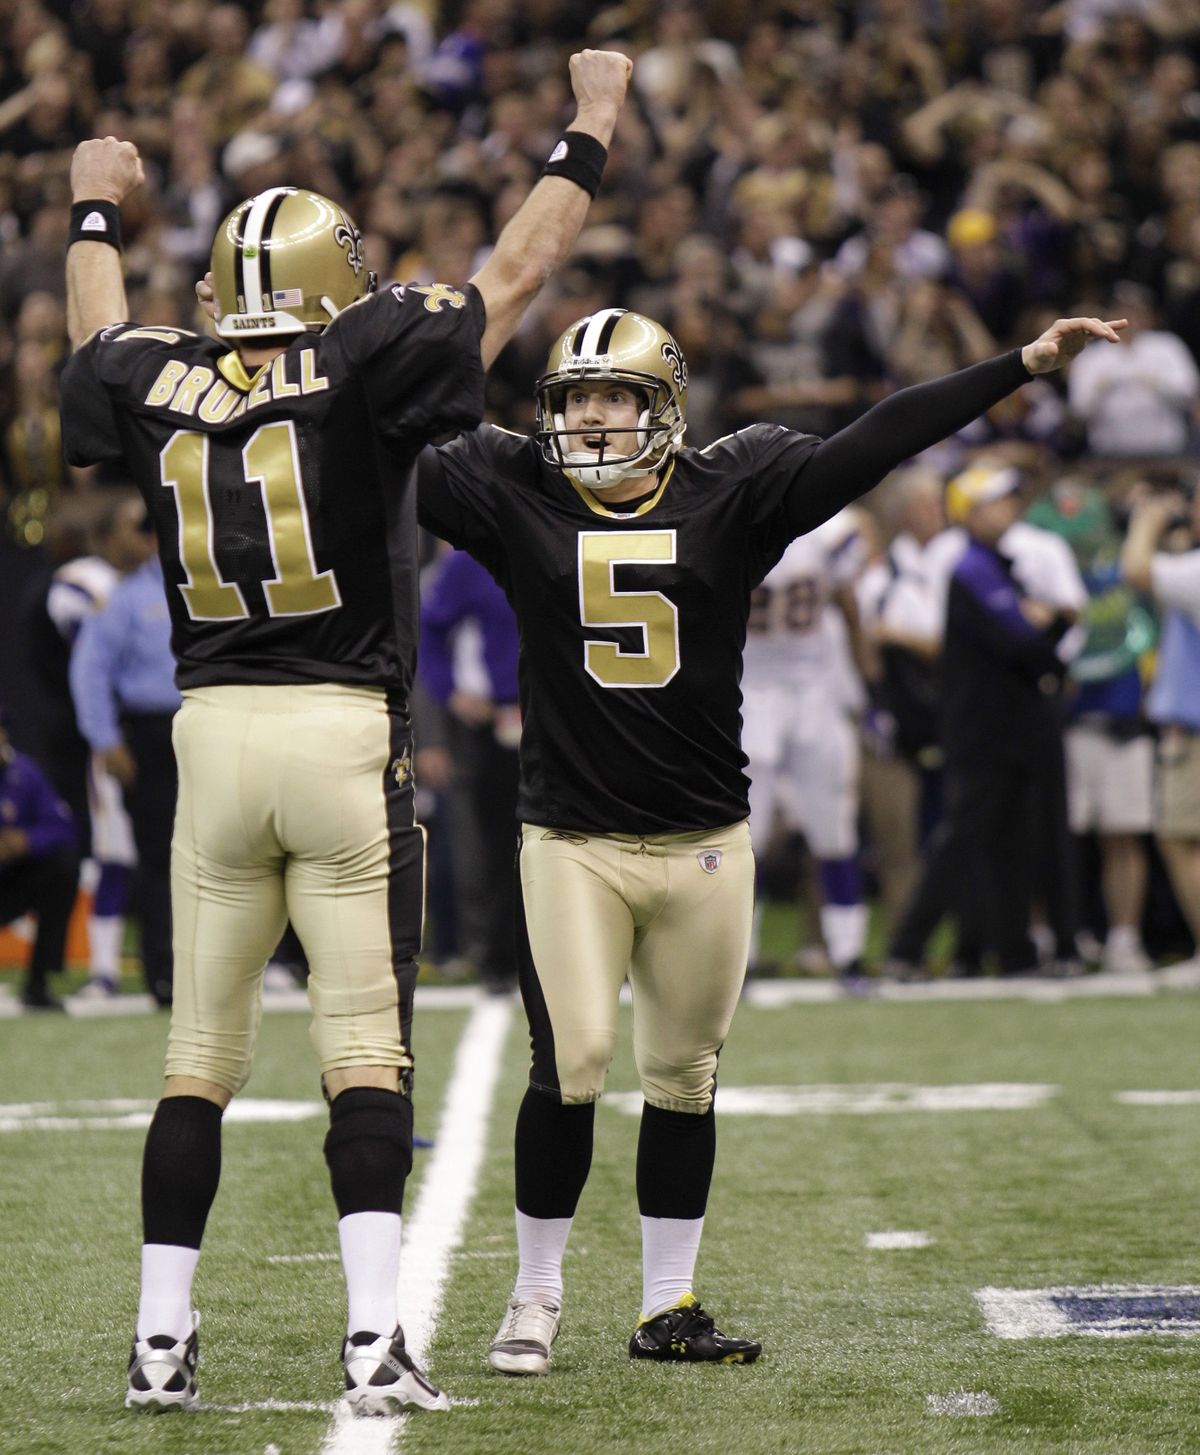 Saints kicker Garrett Hartley celebrates with Mark Brunell after kicking the winning field goal during overtime of the NFC Championship.  (Associated Press)